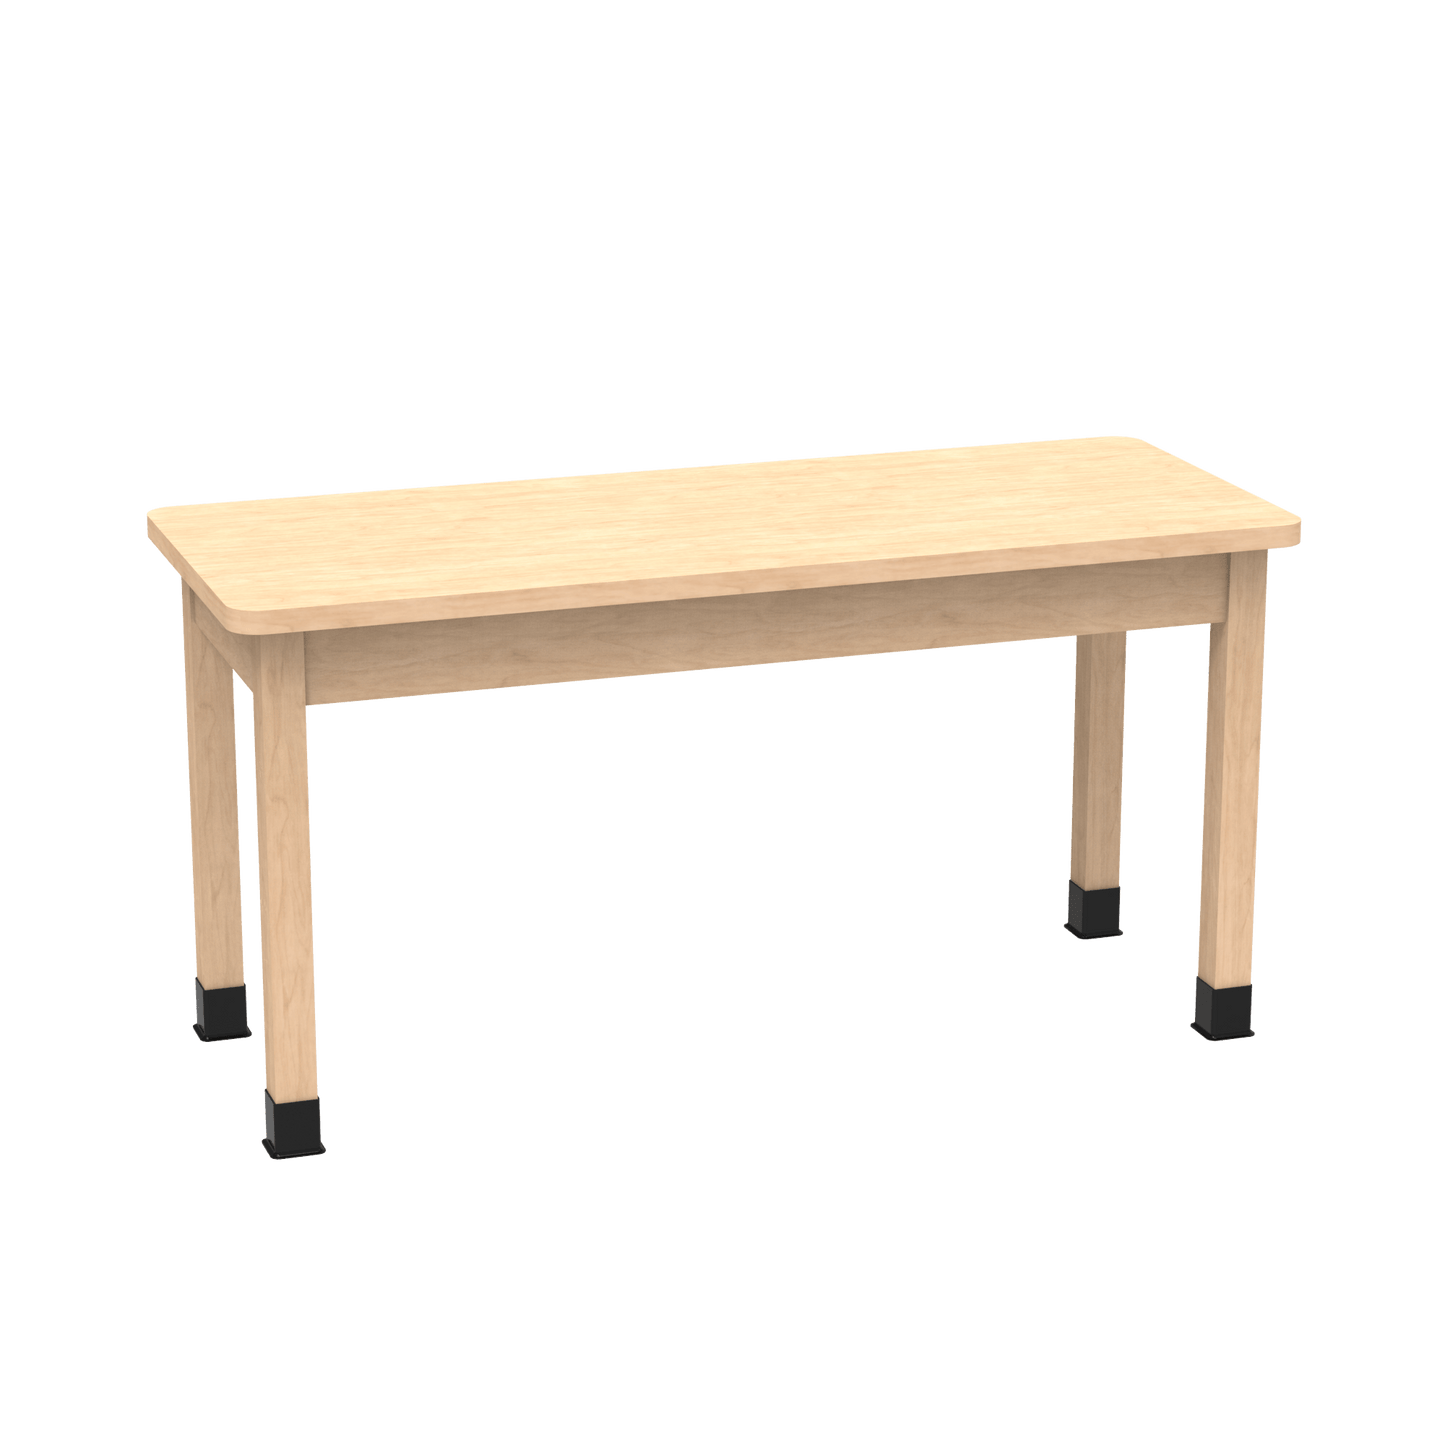 Diversified Woodcrafts Science Table - Plain Apron - 48" W x 42" D - Solid Wood Frame and Adjustable Glides - SchoolOutlet